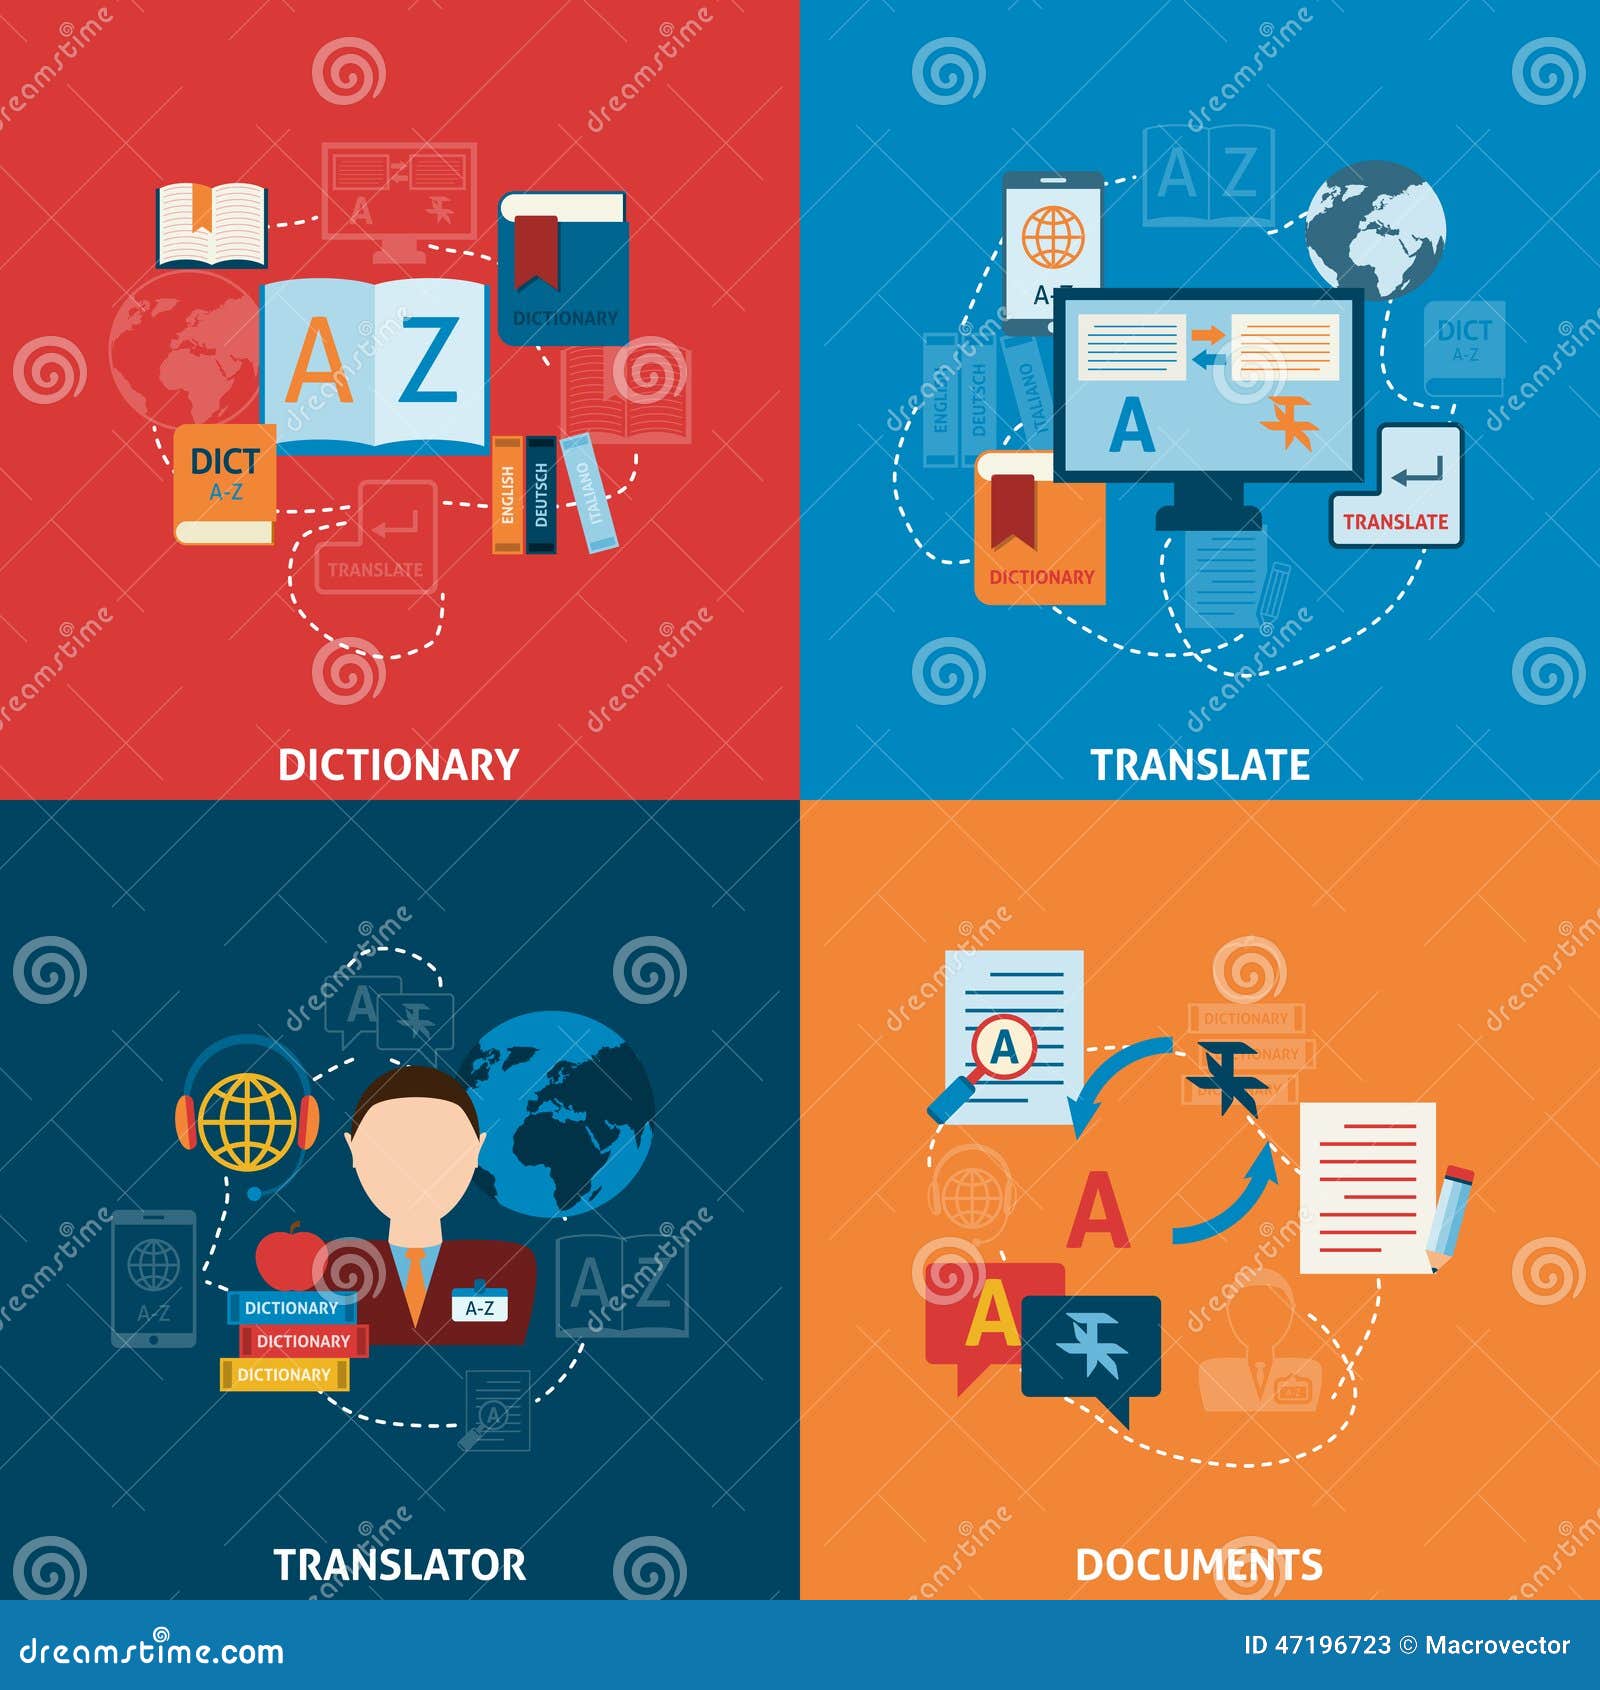 translation and dictionary flat icons composition